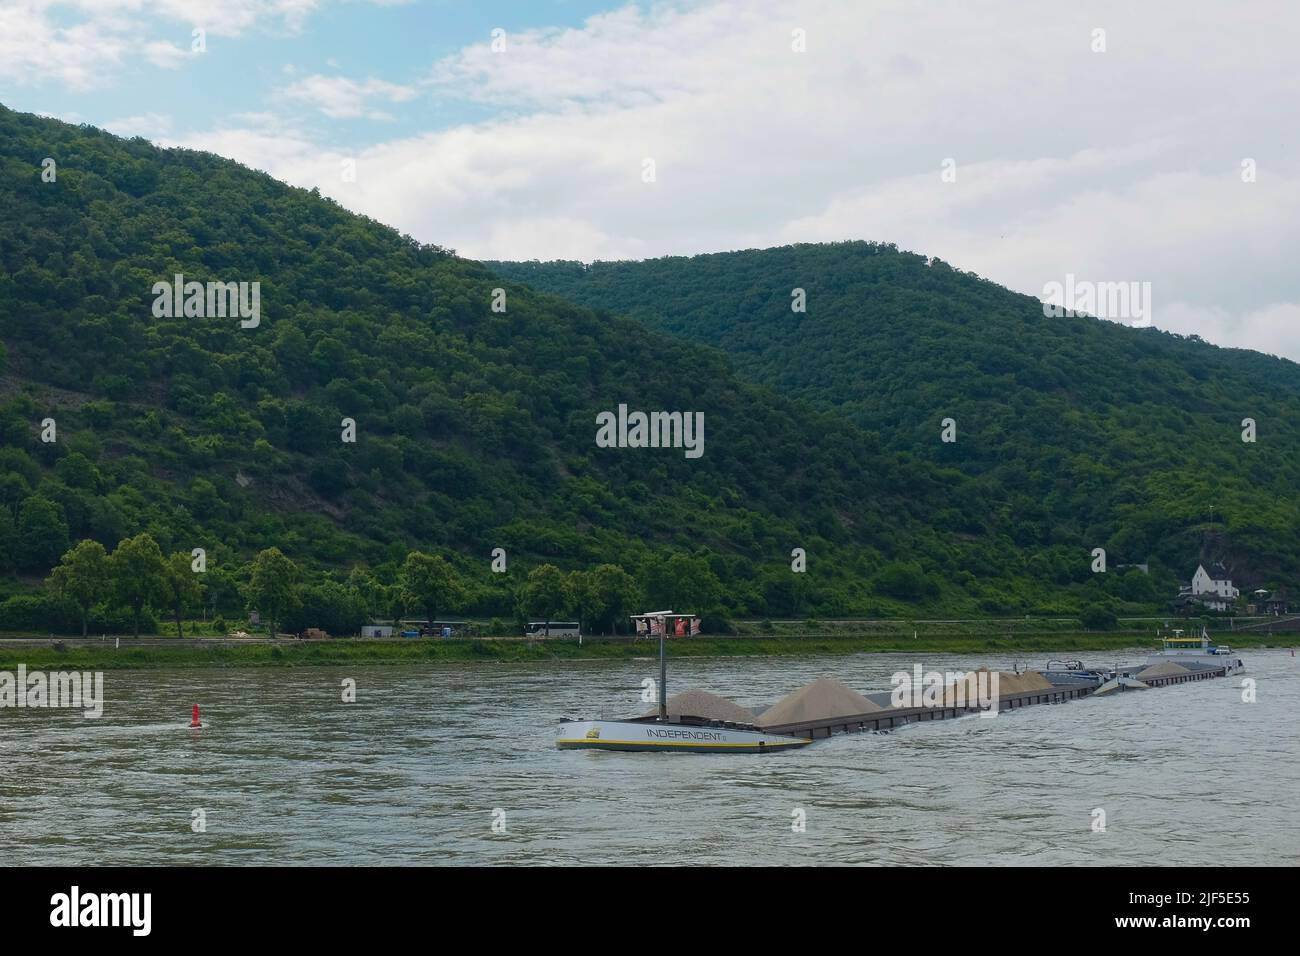 A flat-bottomed river barge, the Independent II, transports sand and gravel through the Middle Rhine in the Rhineland-Palatinate district of Germany. Stock Photo